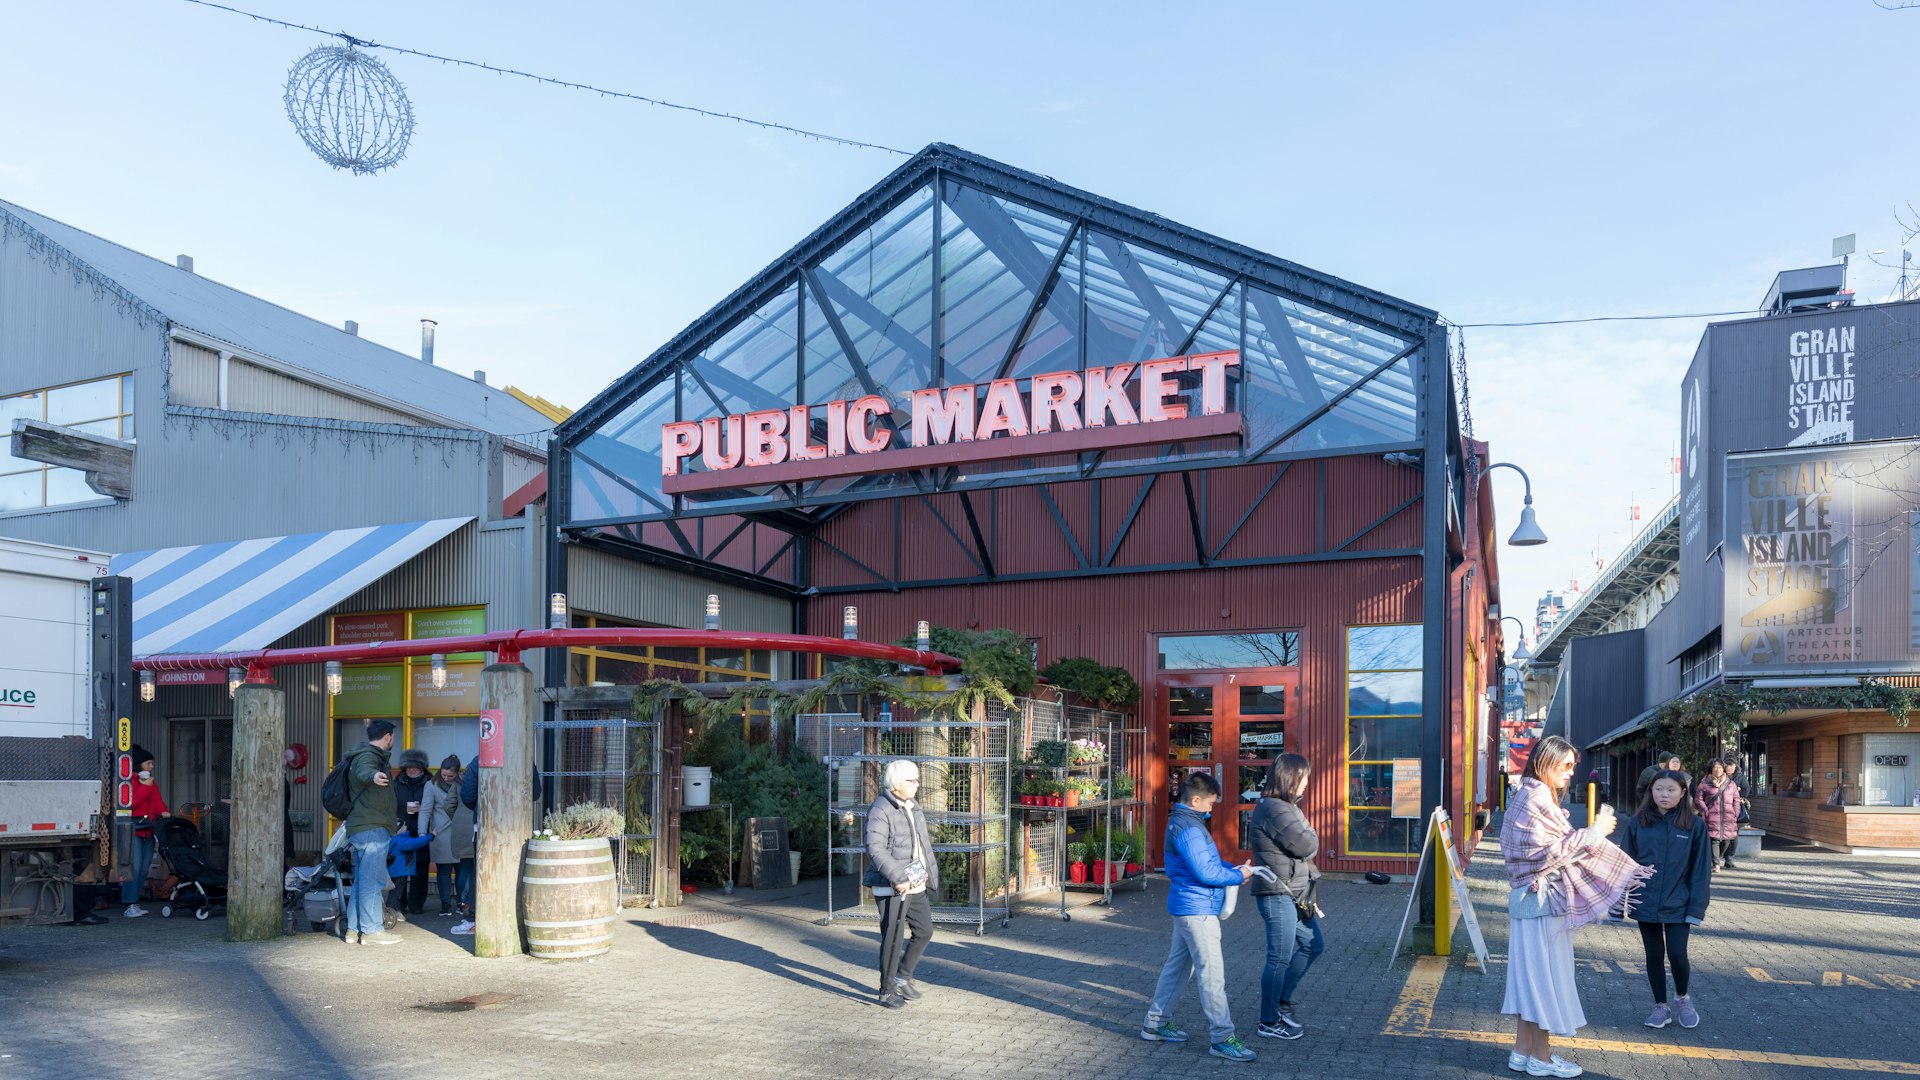 The exterior of Granville Island Public Market in Vancouver, home to over 100 vendors offering fresh seafood, meats, sweets and European specialty foods.